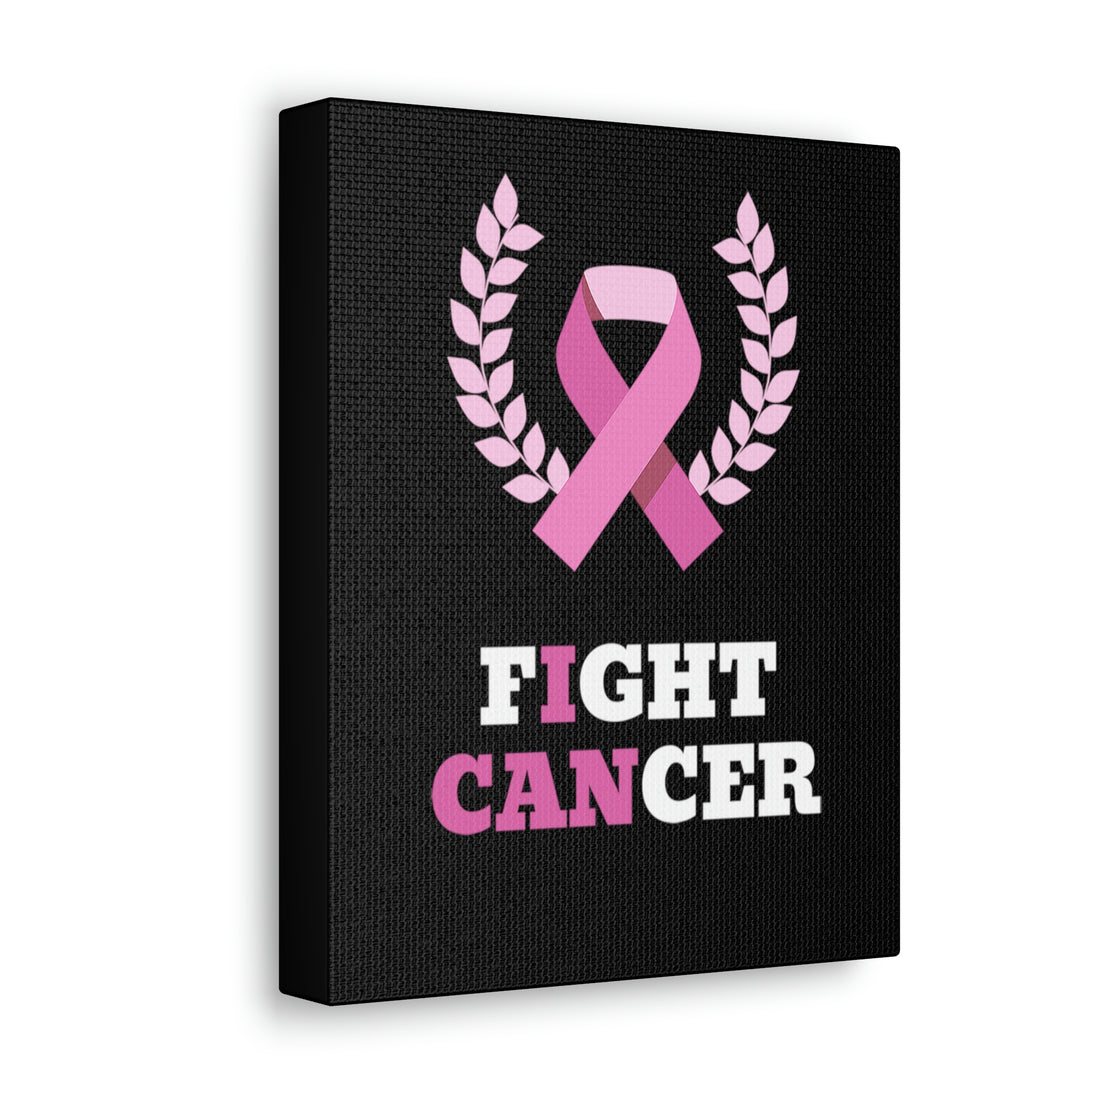 Fight Cancer I Can - Black Canvass Print